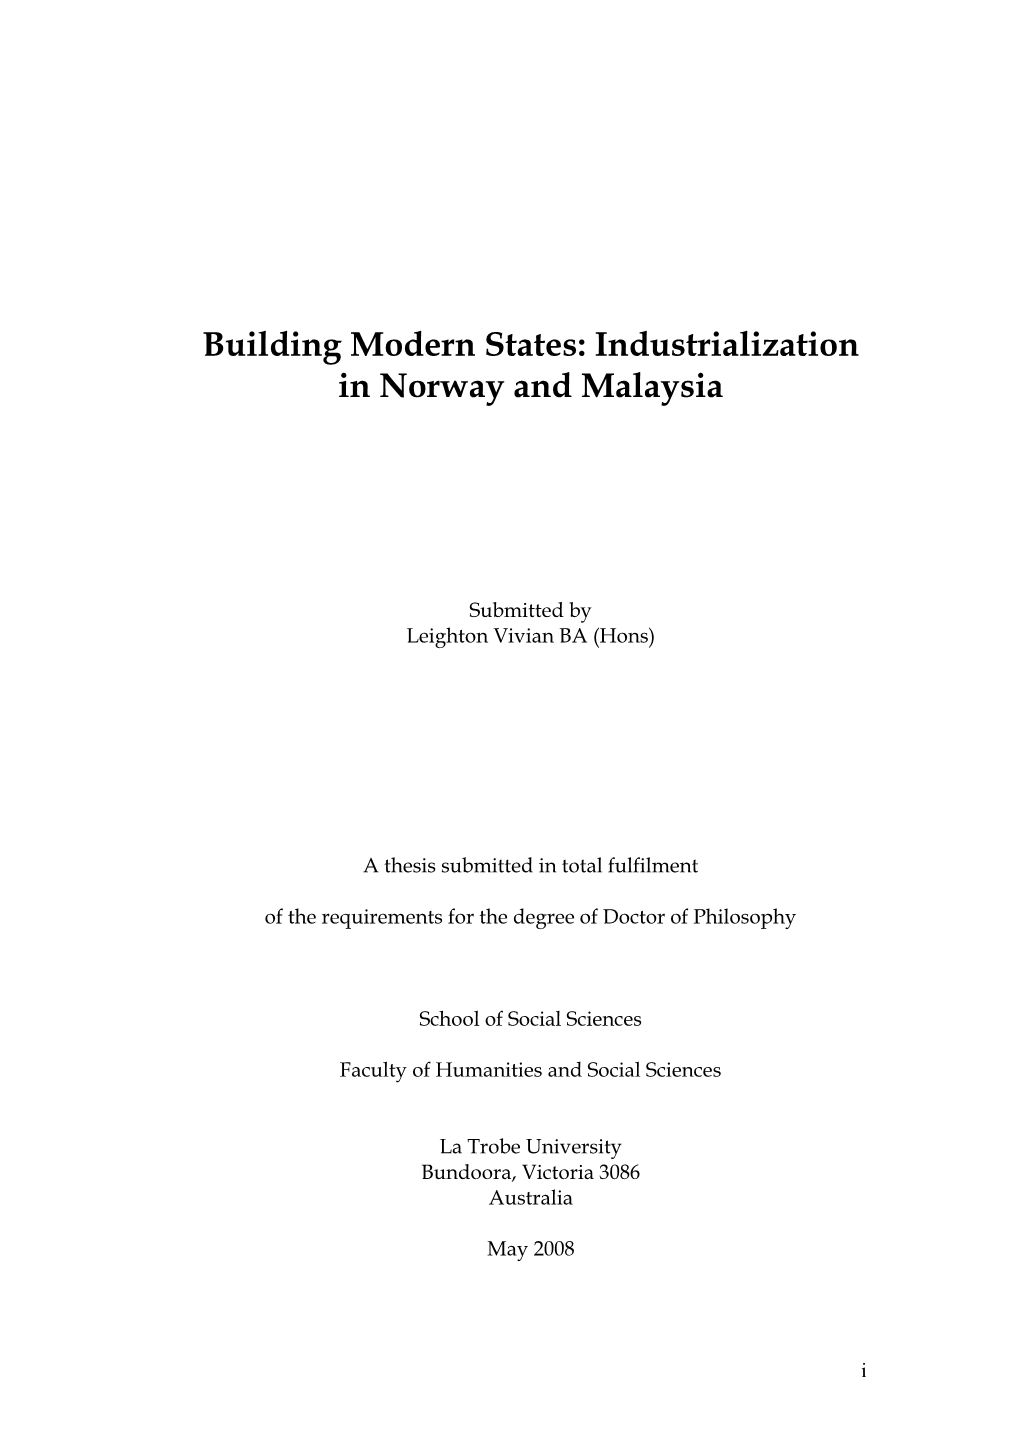 Building Modern States: Industrialization in Norway and Malaysia